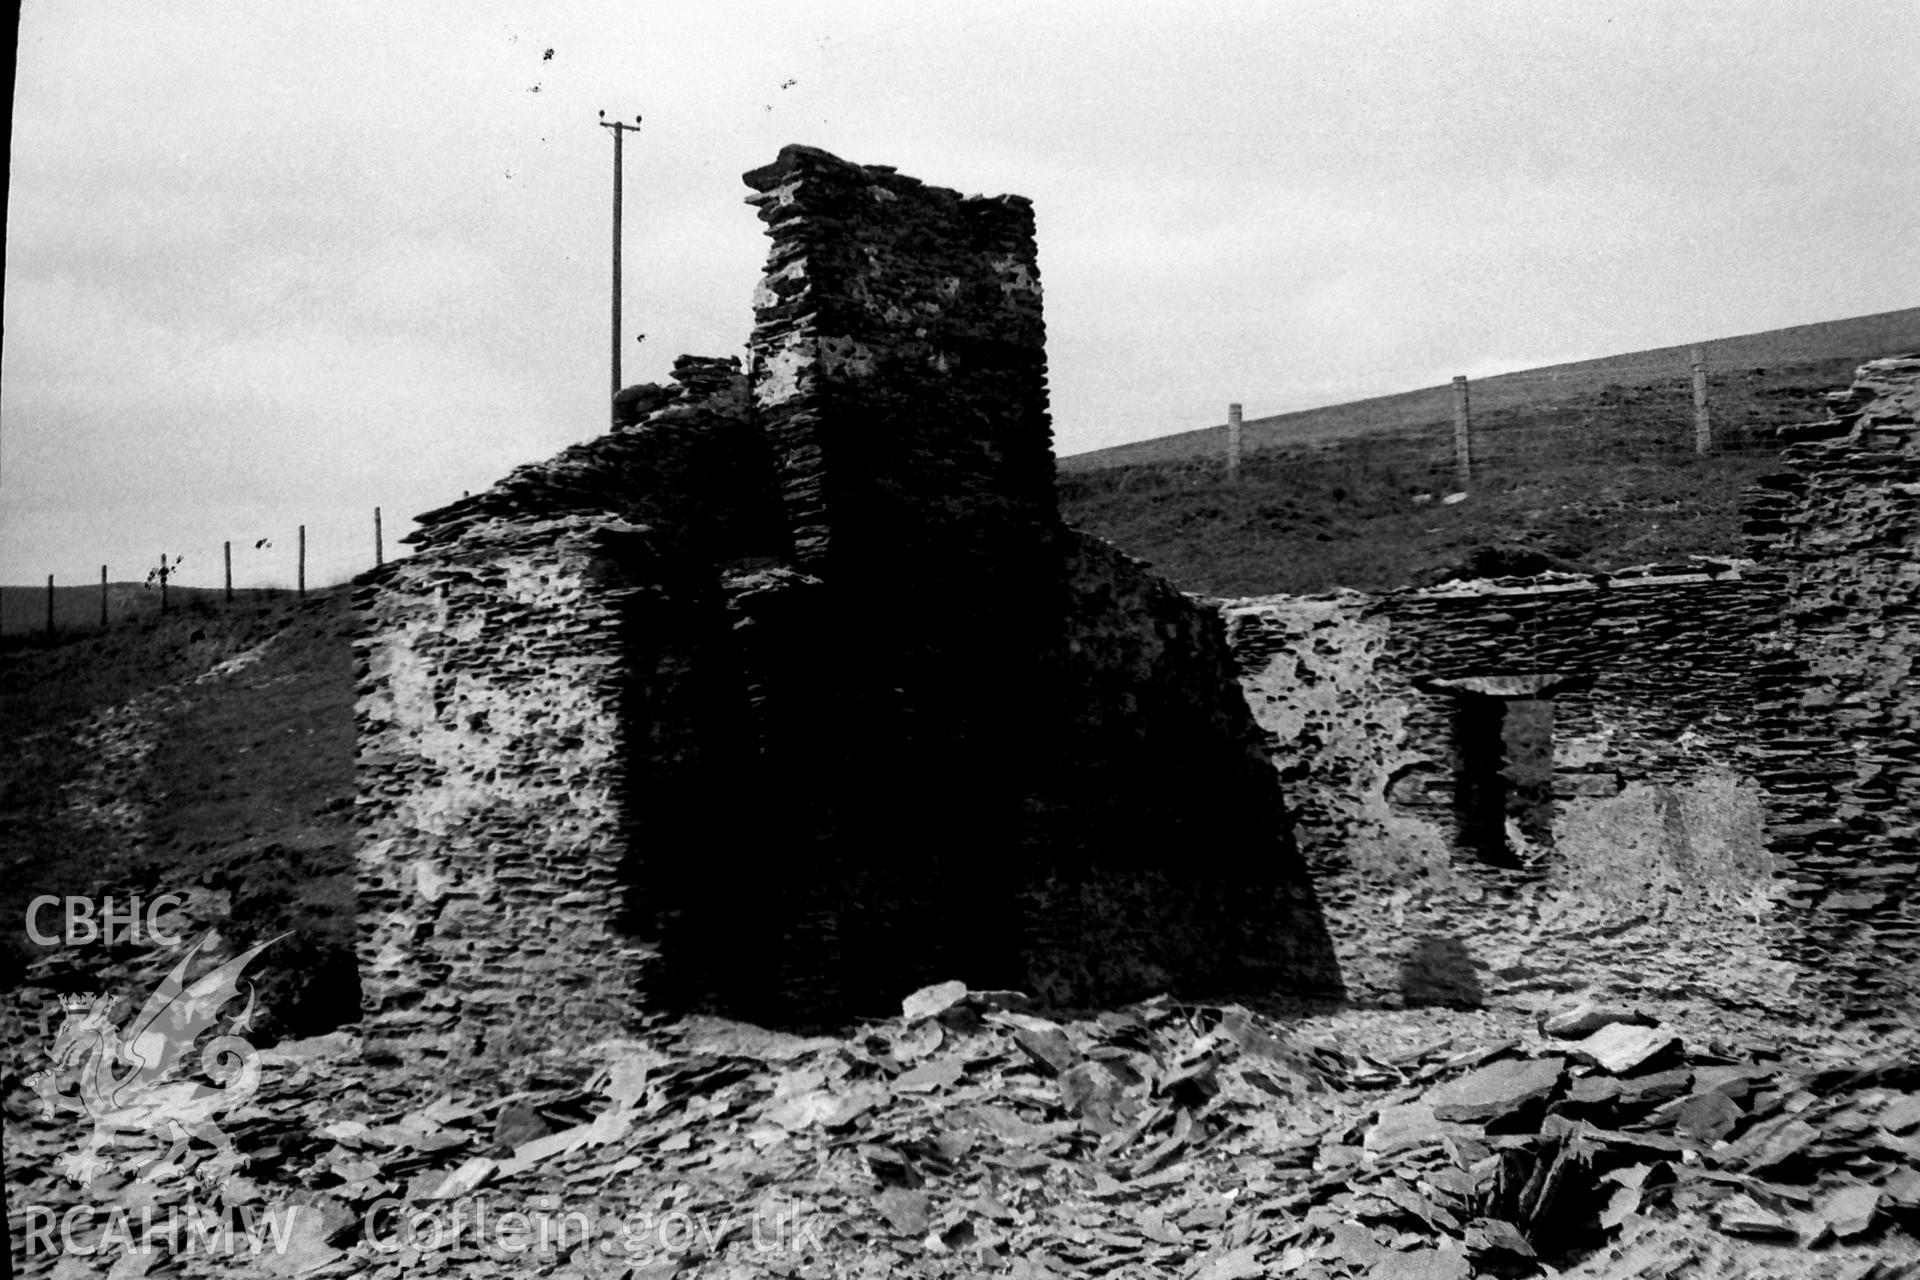 Digitised black and white photograph of 'End house at Rhanc-y-Mynydd,' produced by Martin Davis as part of his dissertation: 'The Form and Architecture of Nineteenth Century Industrial Settlements in Rural Wales,' 1979.